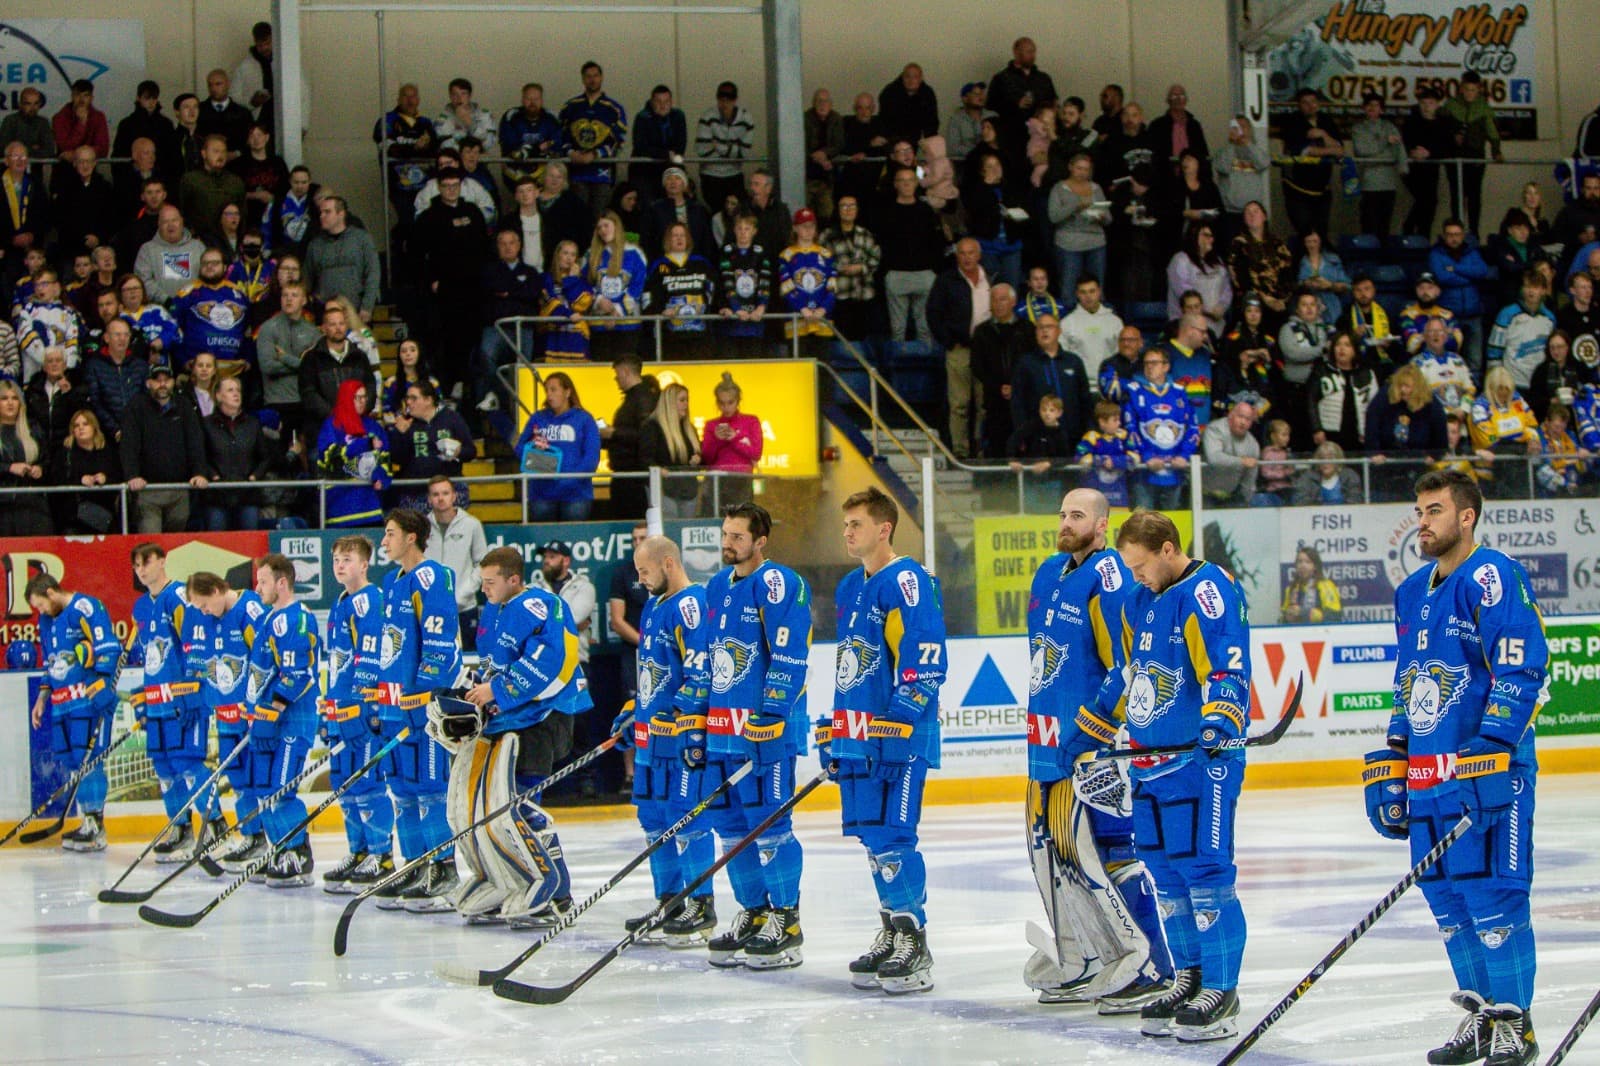 Shawn Cameron (right) scored a hattrick on his Fife Flyers debut (Image: Flyers Images)